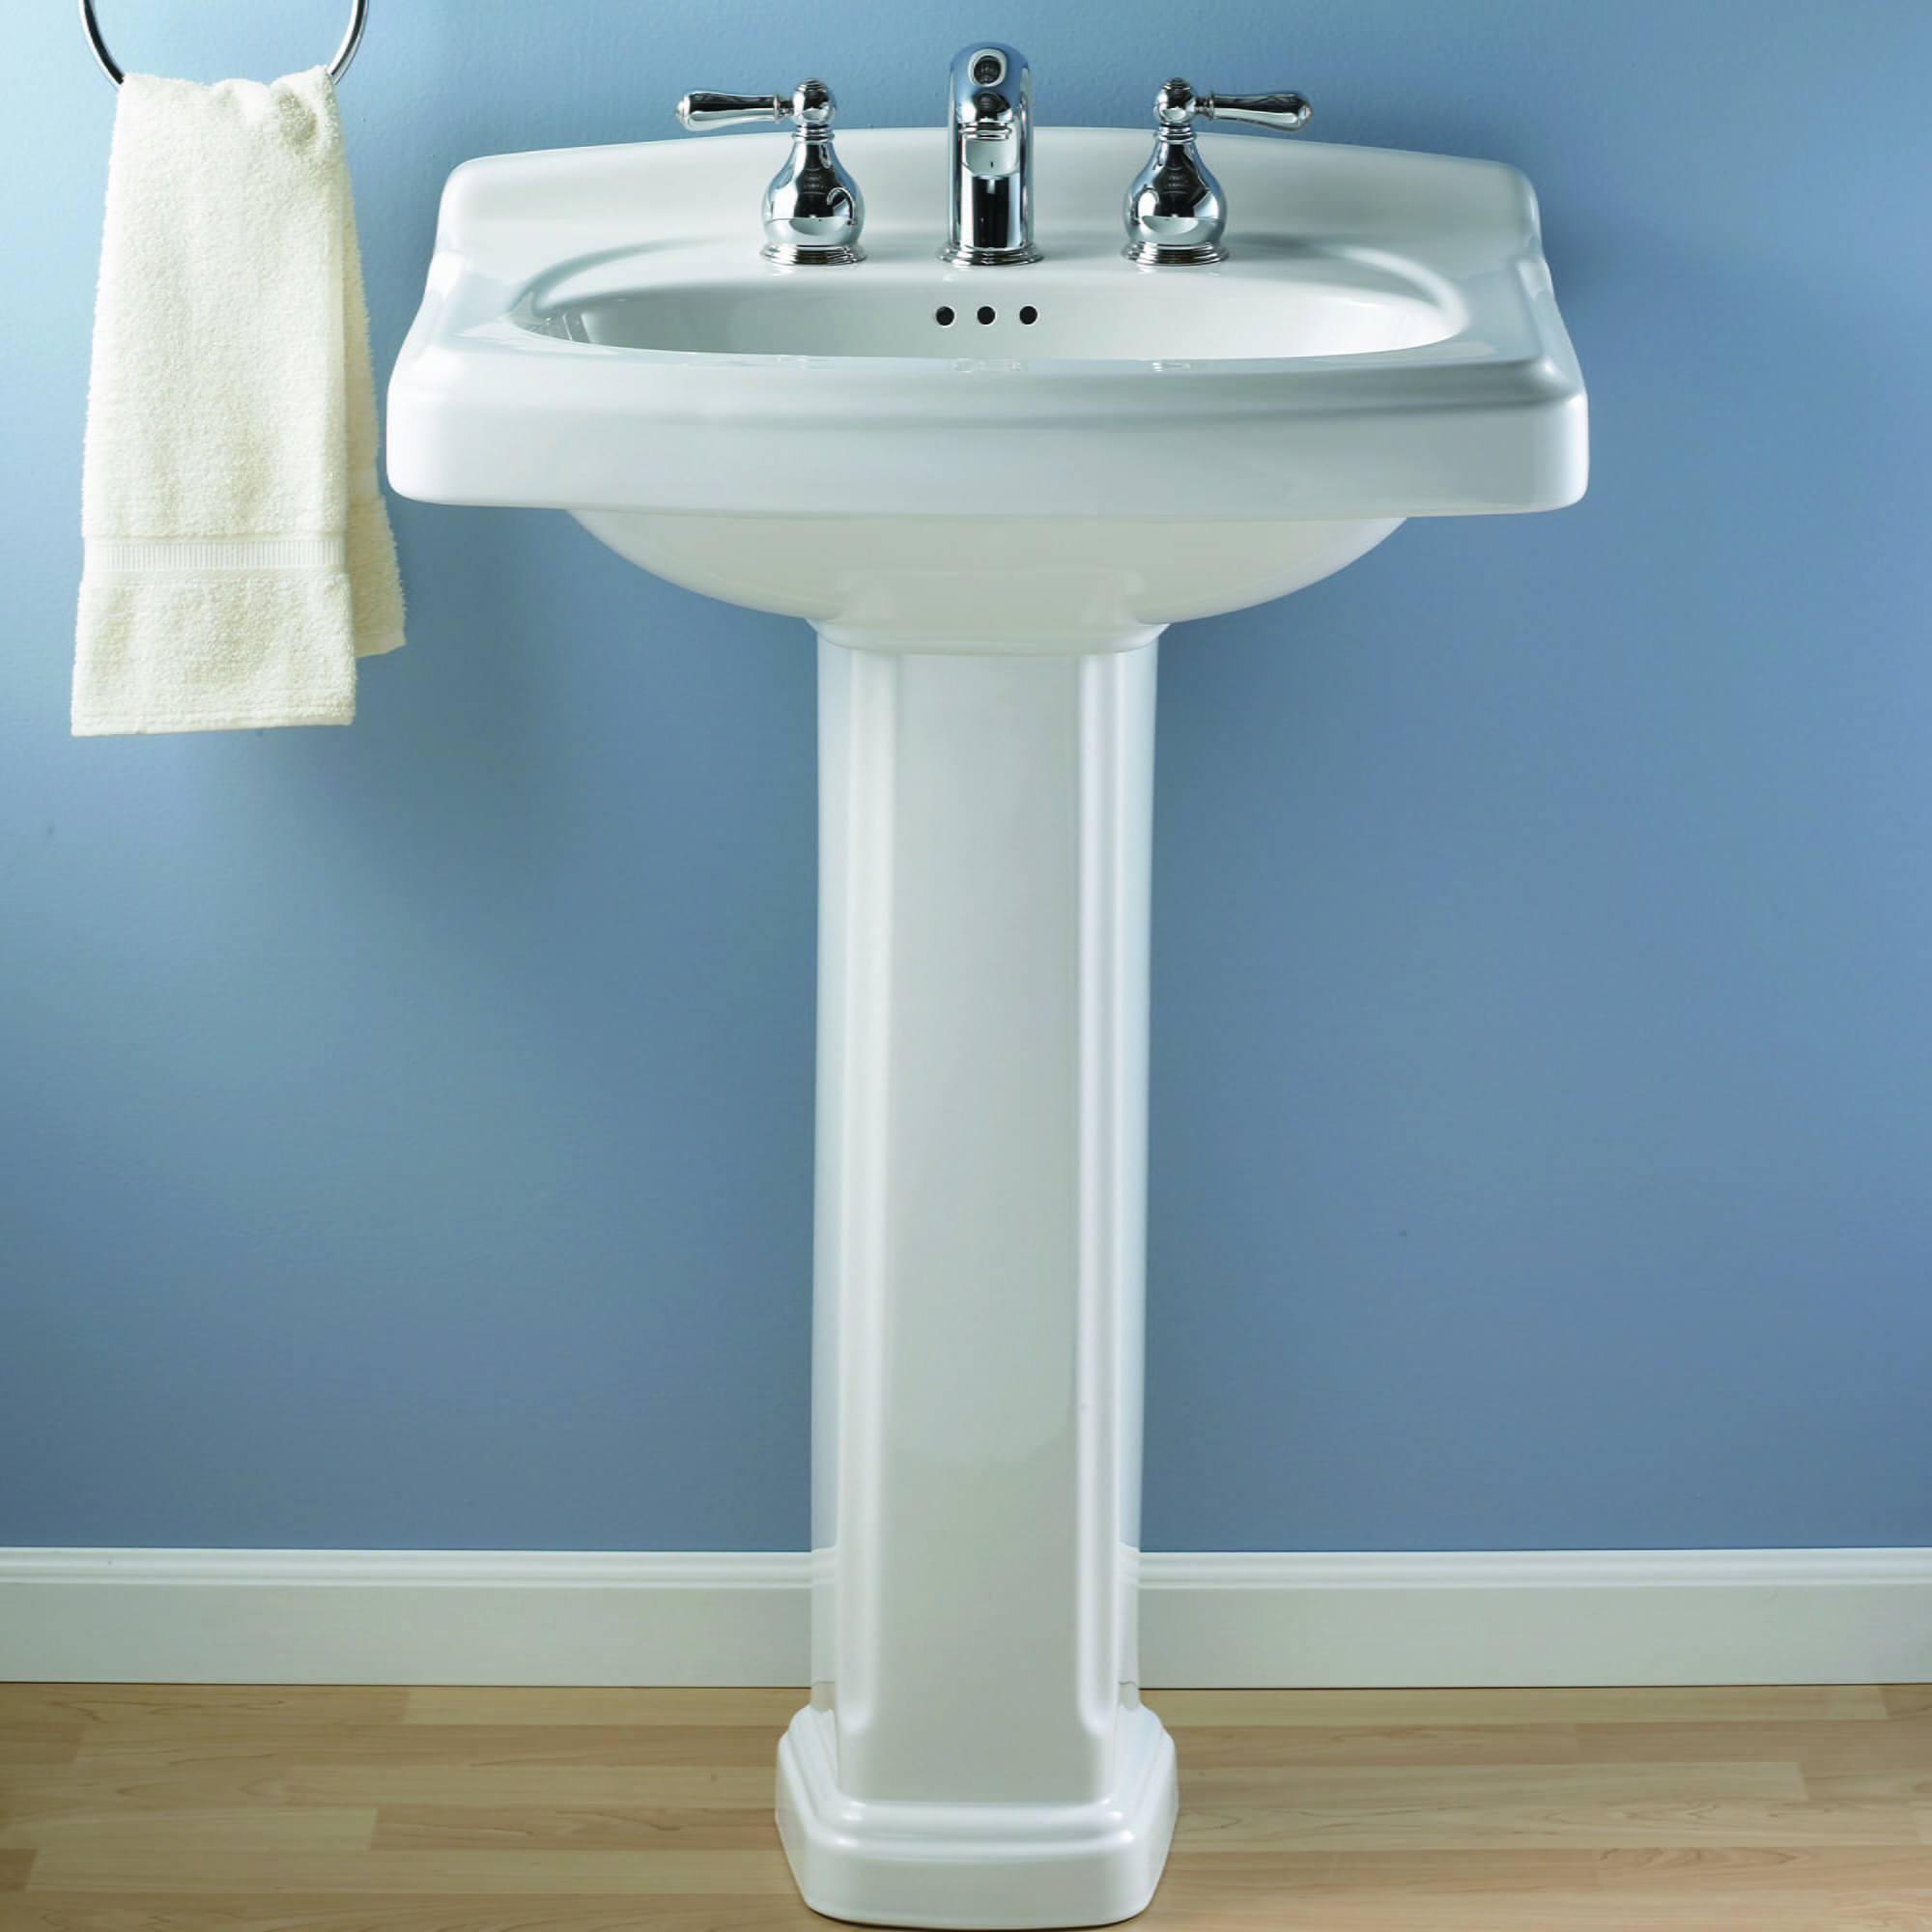 Portsmouth® 8-Inch Widespread Pedestal Sink Top and Leg Combination